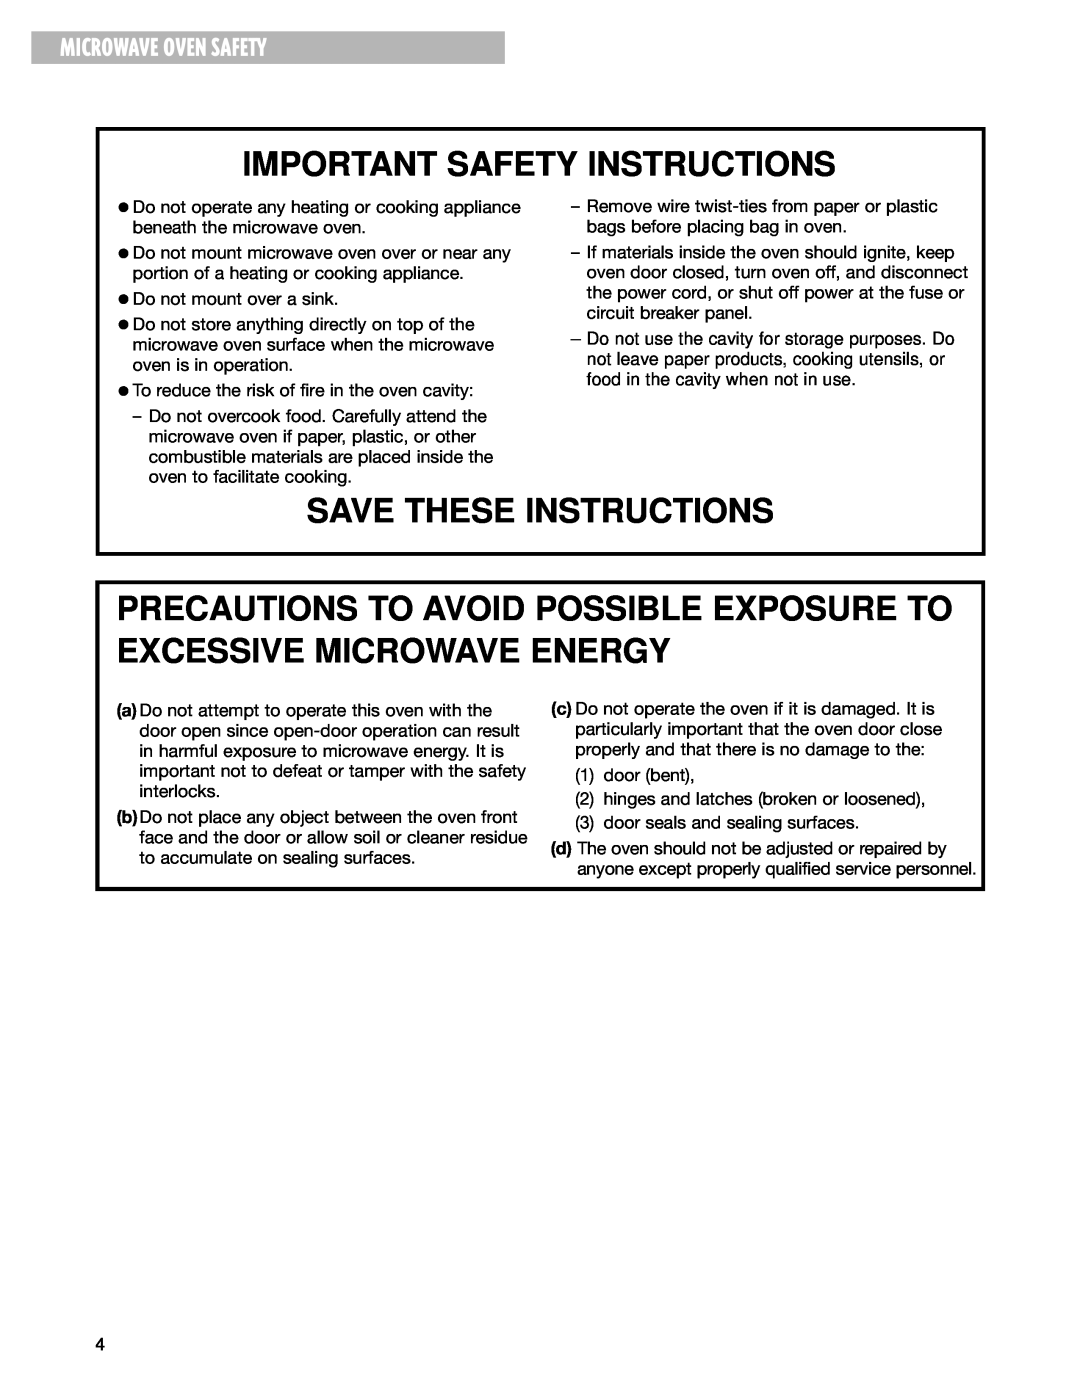 Whirlpool MT3100SH, MT3130SH Precautions To Avoid Possible Exposure To Excessive Microwave Energy, Microwave Oven Safety 